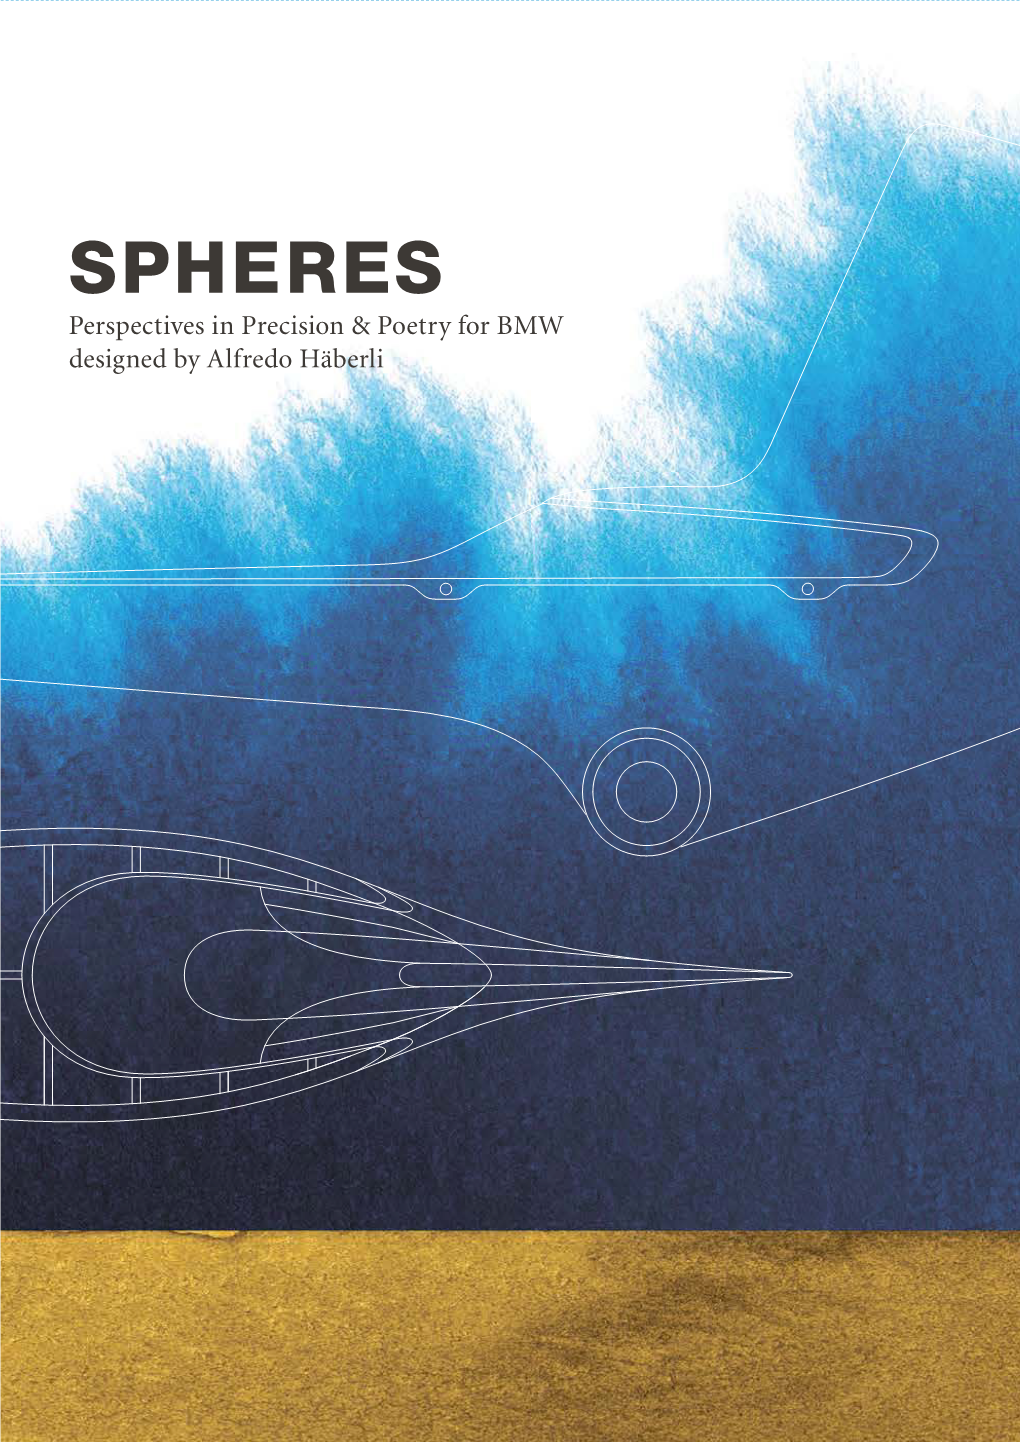 SPHERES Perspectives in Precision & Poetry for BMW Designed by Alfredo Häberli